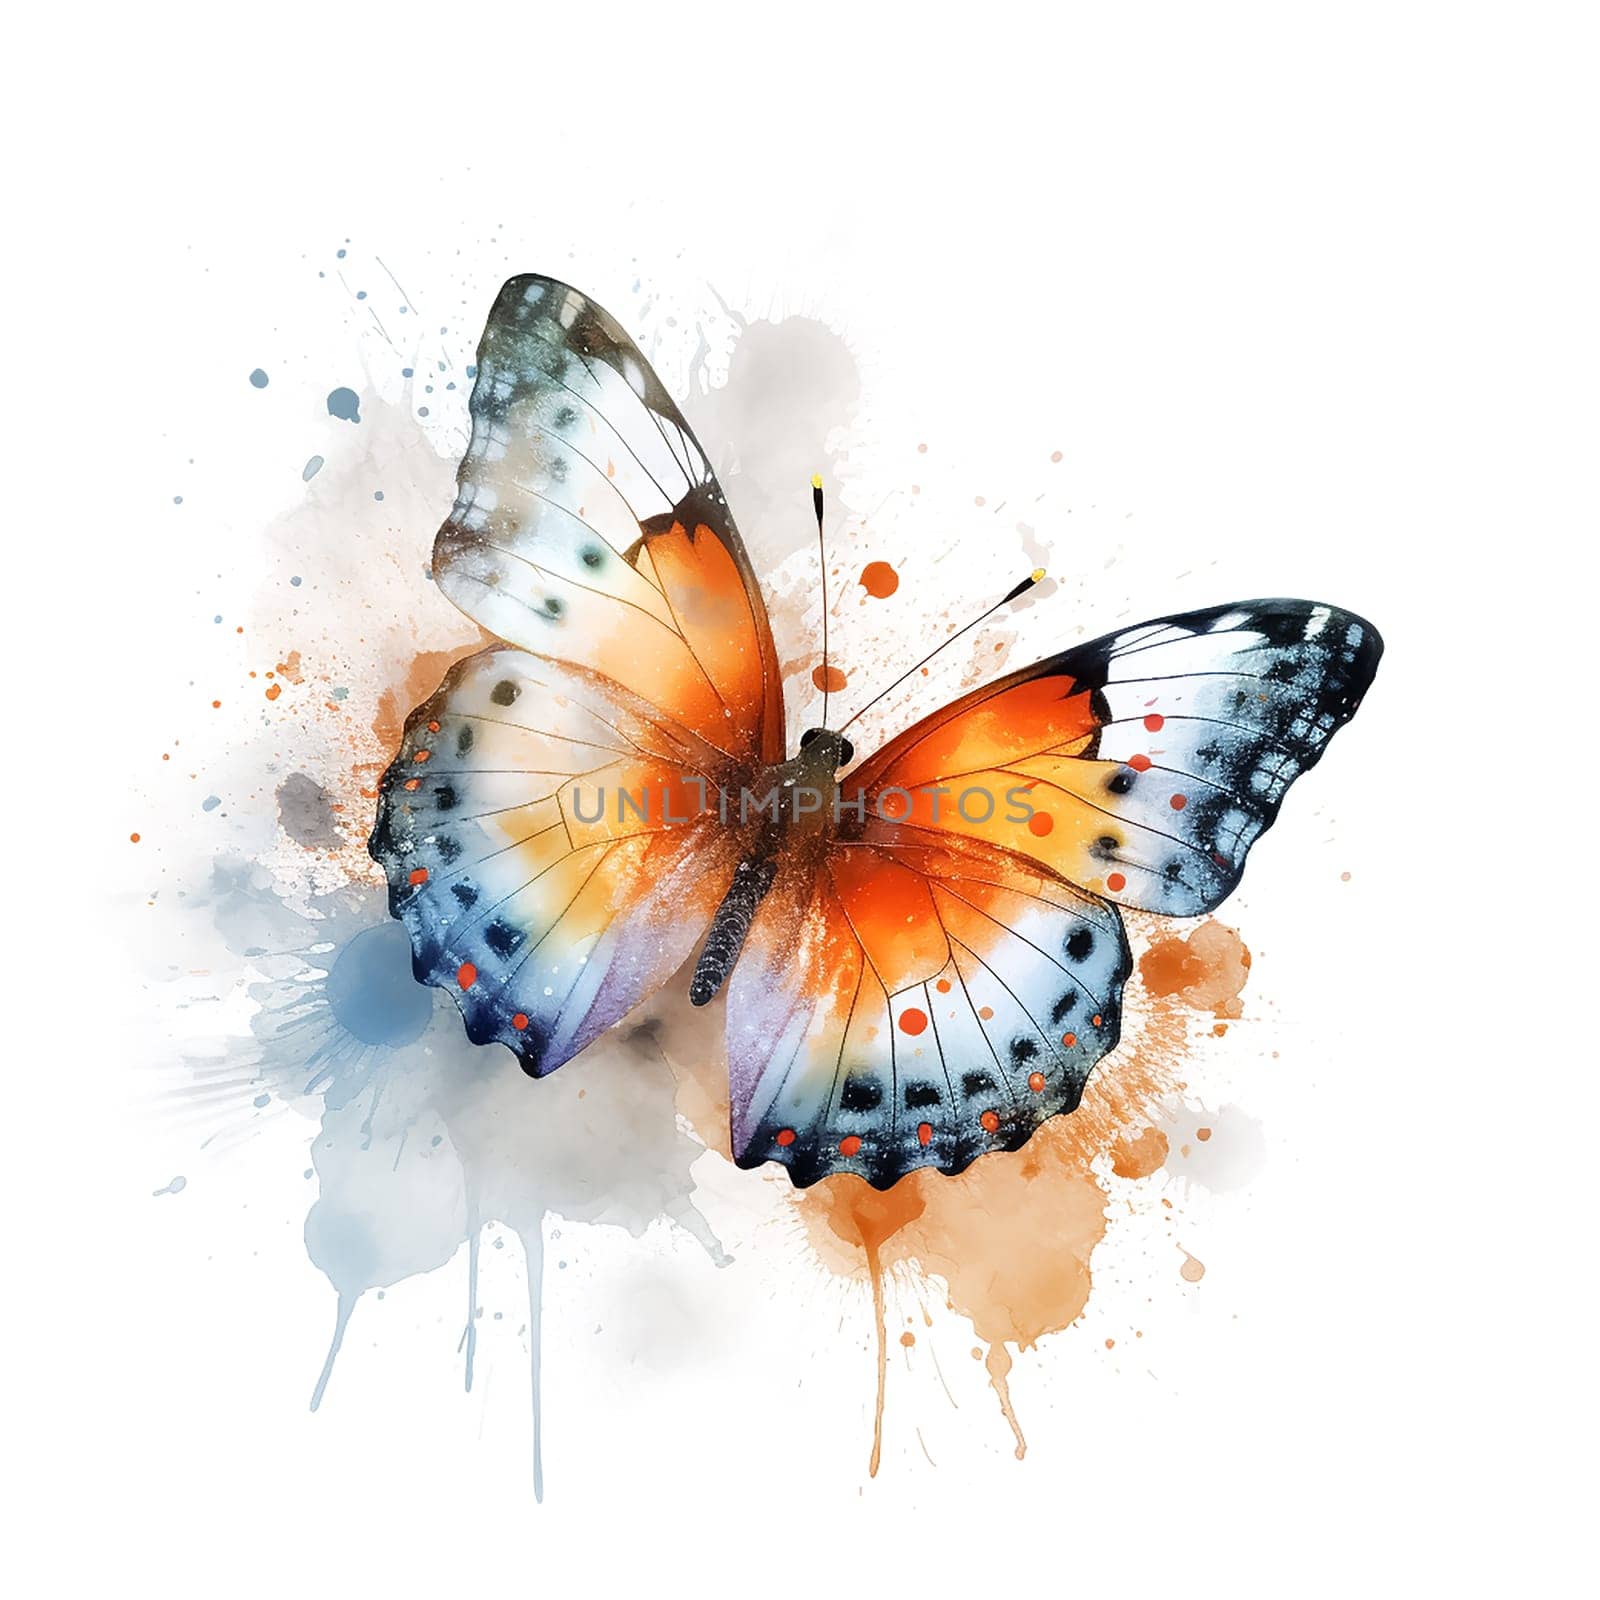 Illustration of a beautiful butterfly created with watercolor paint isolated on white background. Butterfly on a white background by esvetleishaya